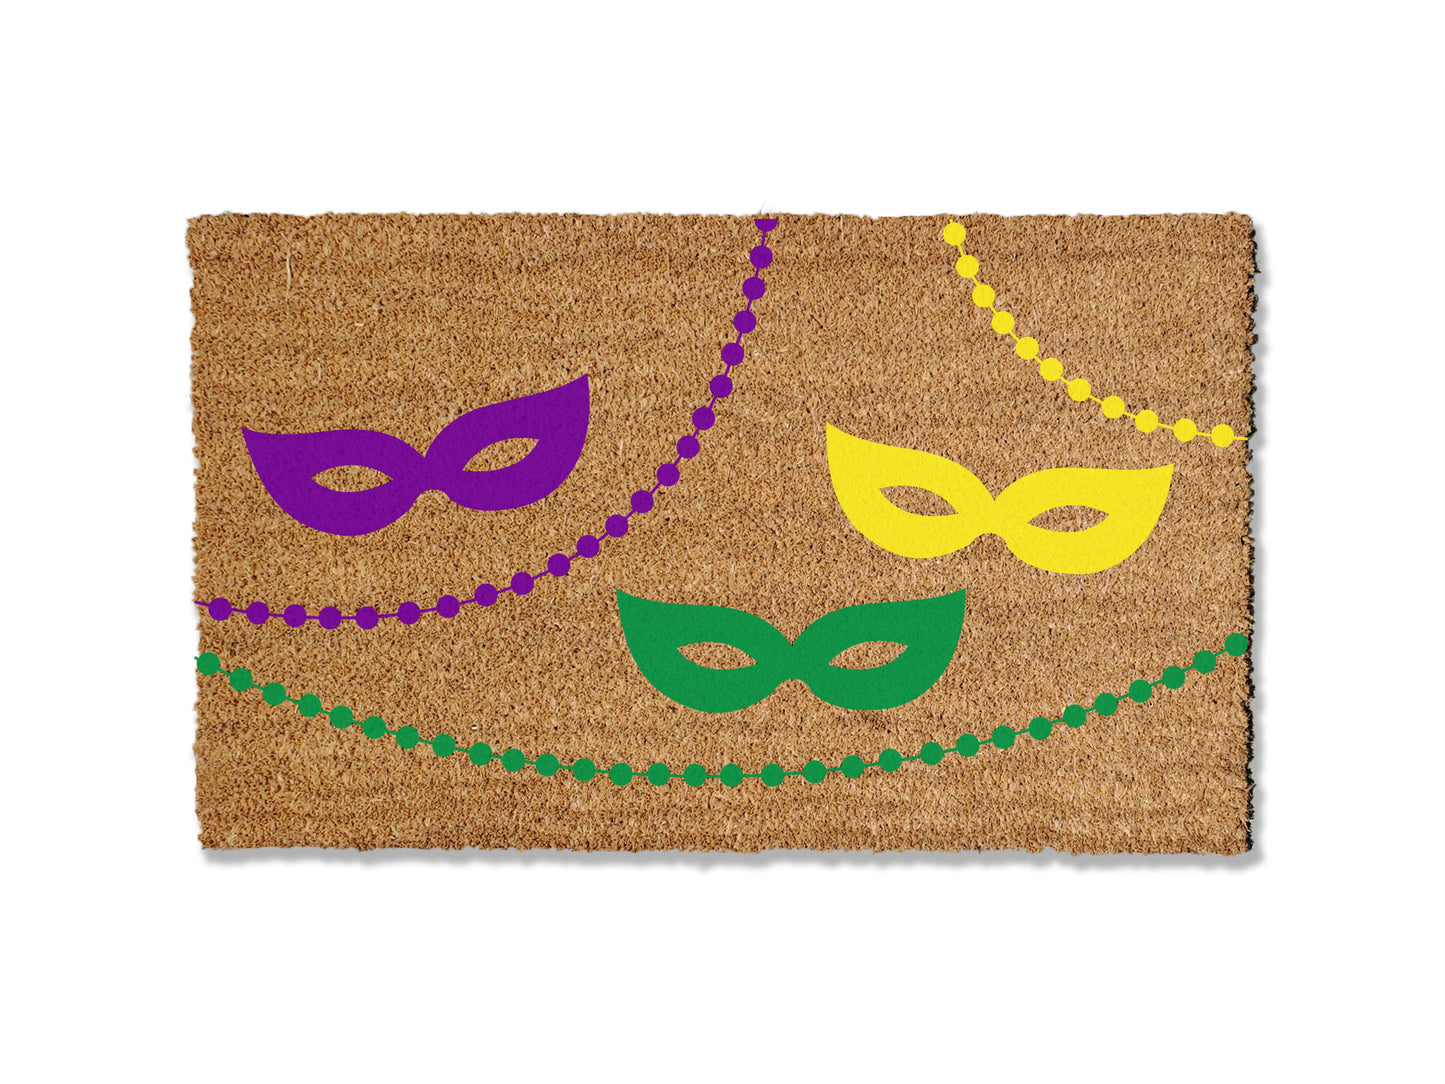 Bring the spirit of Mardi Gras to your doorstep with our festive coir doormat adorned with colorful masks and beads. Perfect for the celebration, this vibrant mat adds a touch of carnival flair to your entryway.